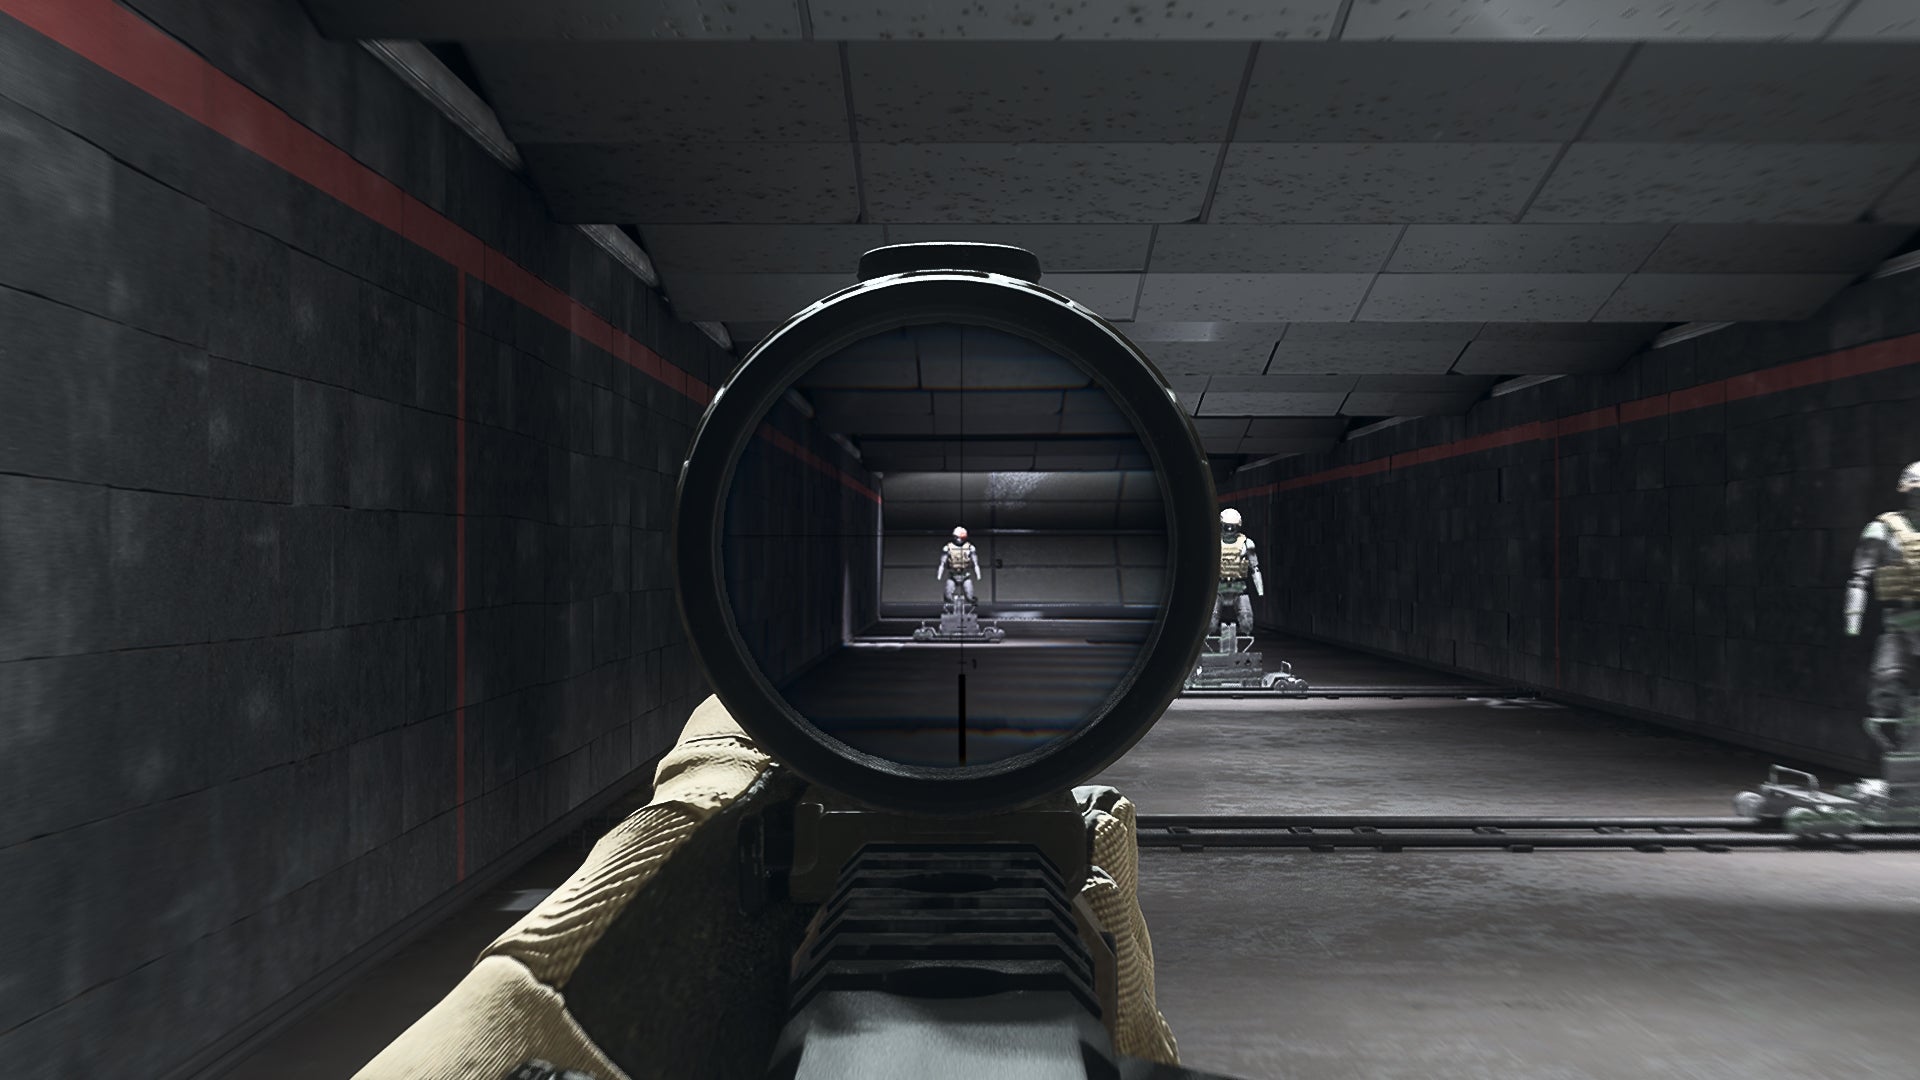 The player in Warzone 2.0 aims at a training dummy using the Schlager 4X optic attachment.